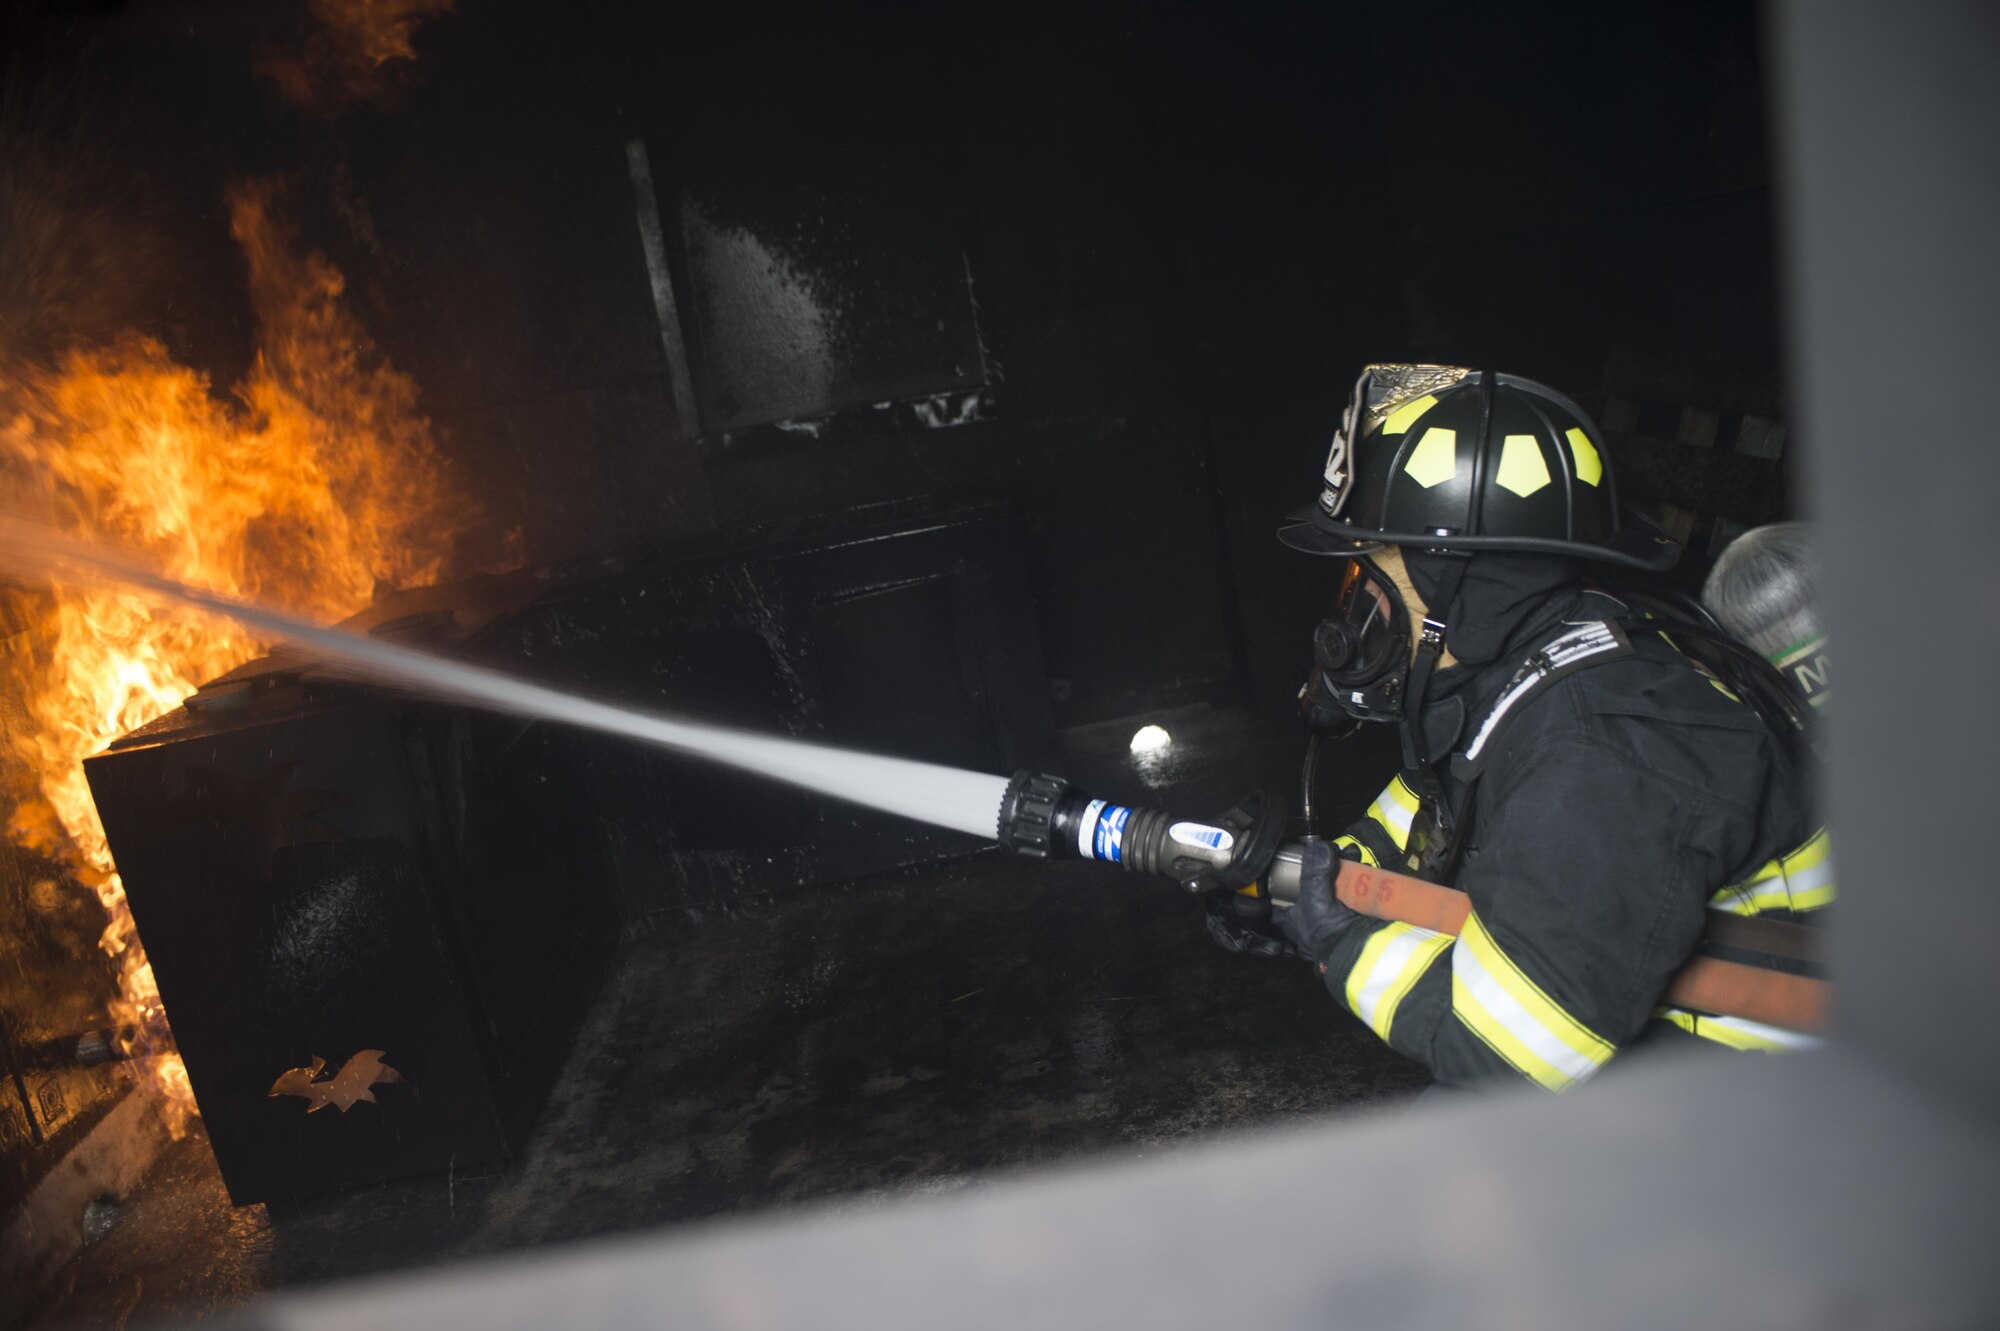 Airmen with the 512th Airlift Wing train fire-fighting skills as they extinguish a structure fire at Dover Air Force Base, Del., April 23, 2016. This training occurs twice a year to keep the fire fighters current and proficient in their training requirements. (U.S. Air Force photo by Tech. Sgt. Nathan Rivard)